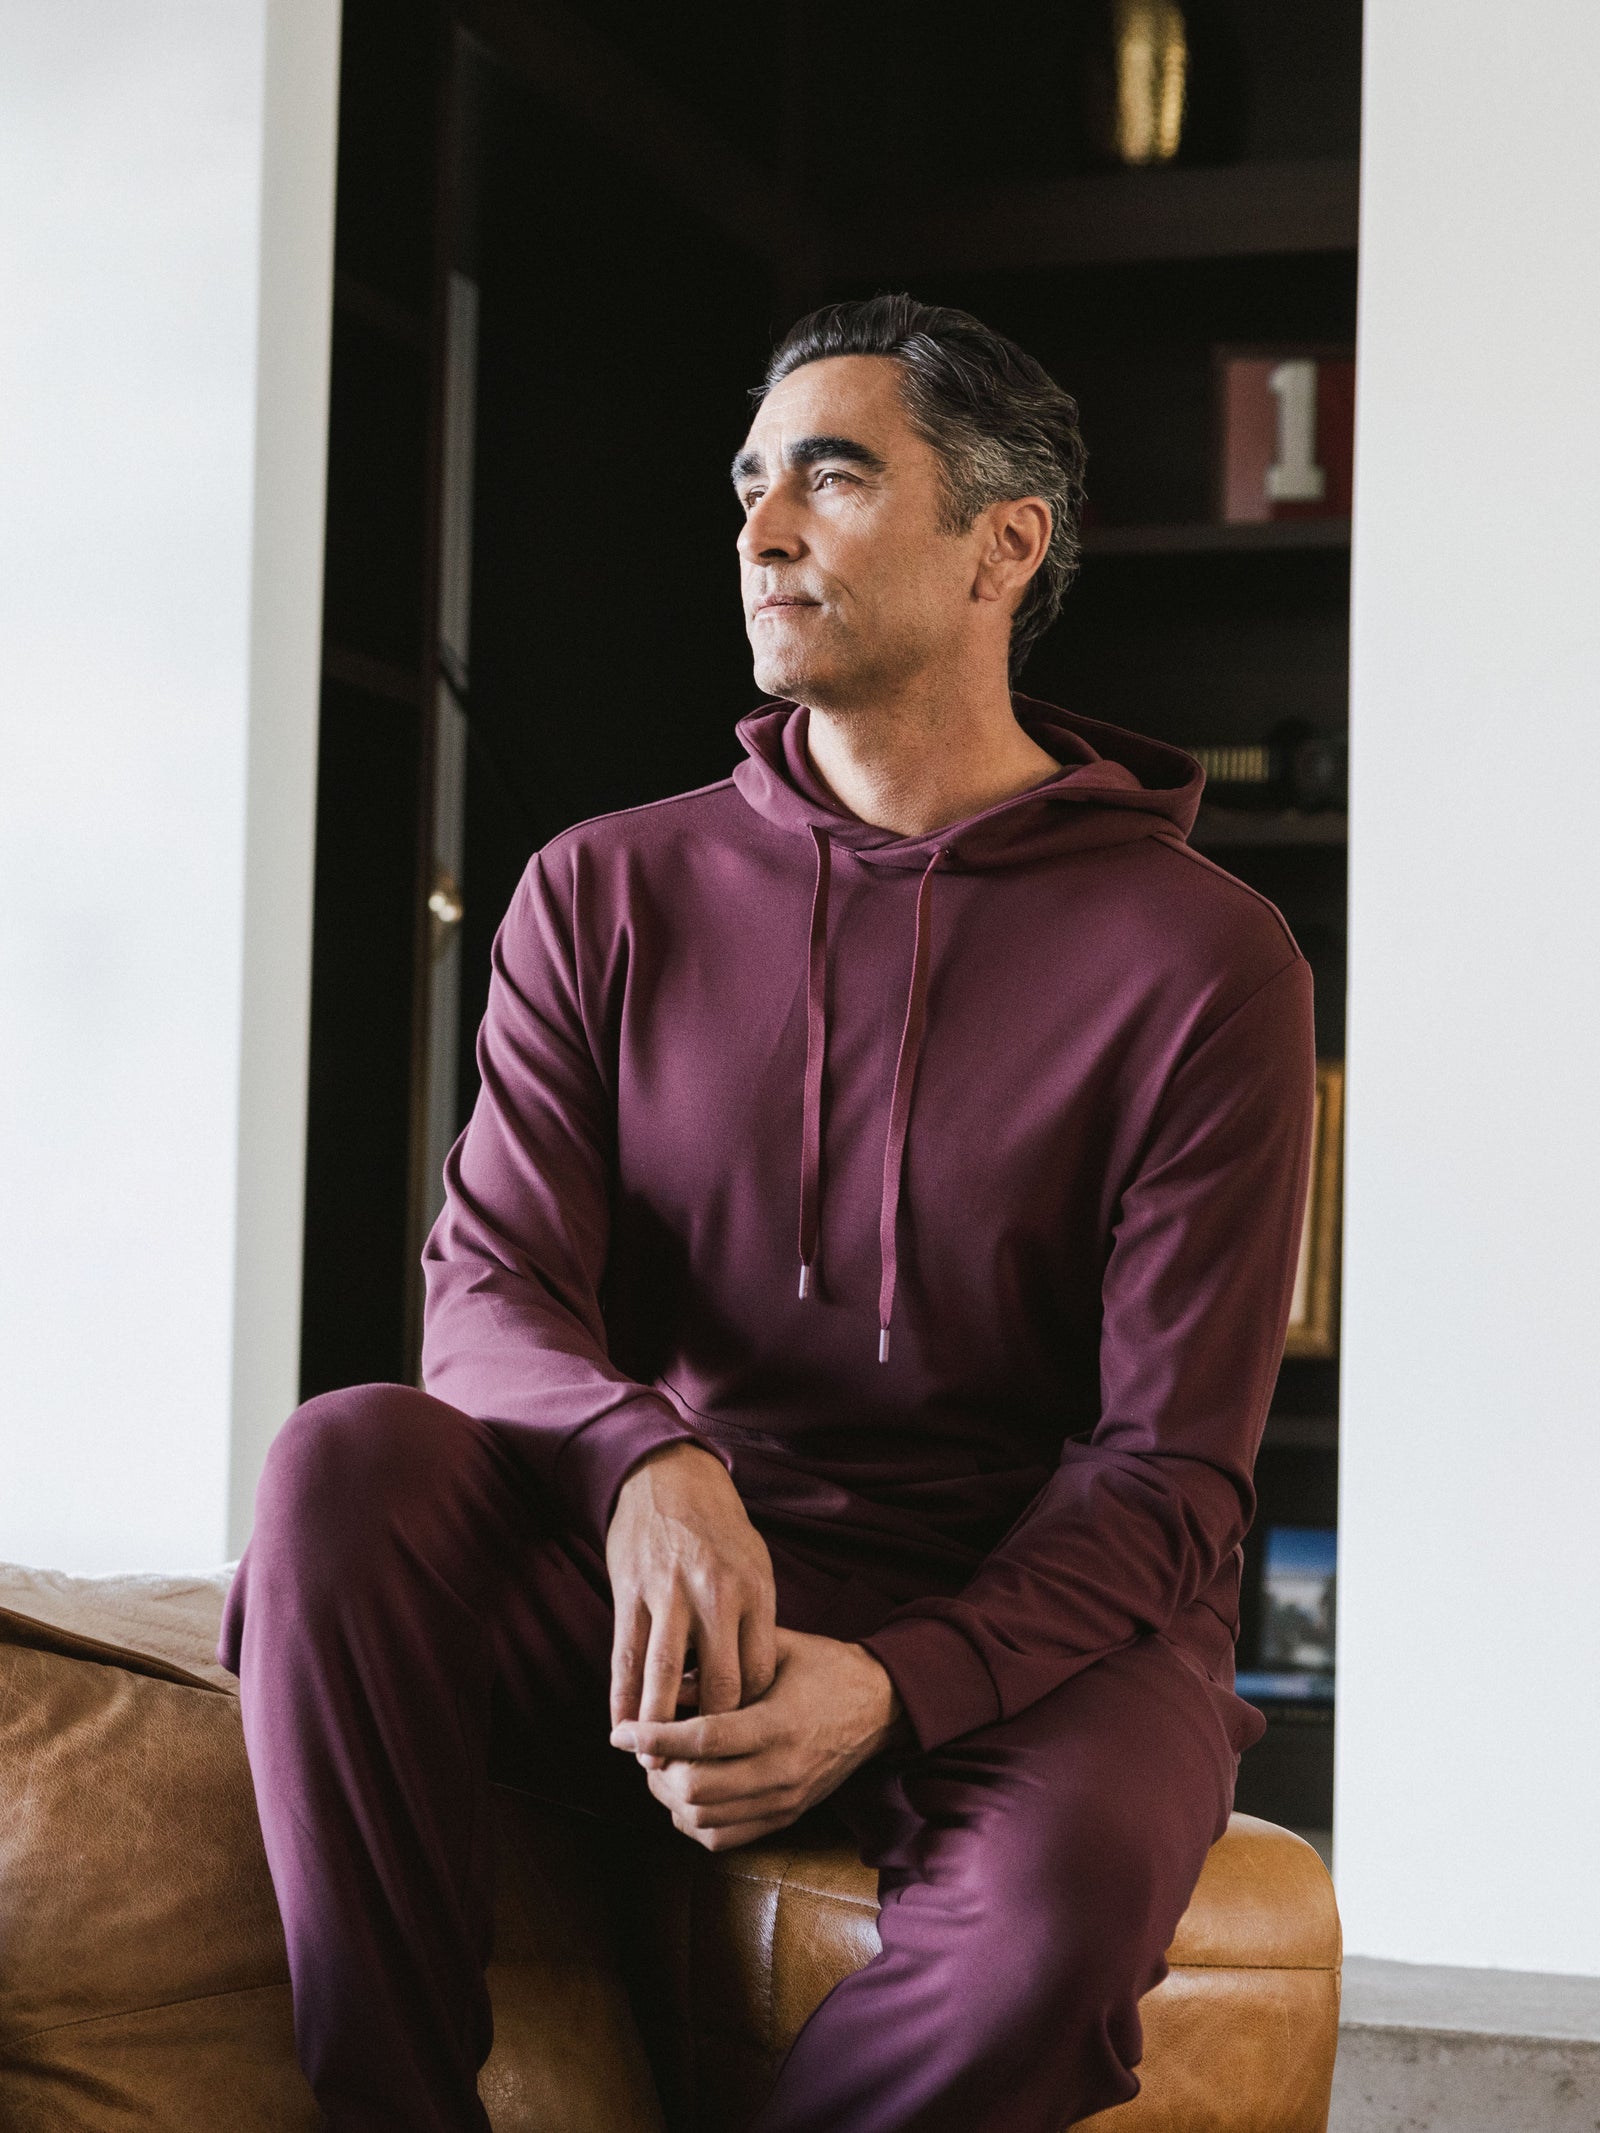 Burgundy Bamboo Hoodie worn by man in a living room of a house. The man is sitting on the arm of a couch.